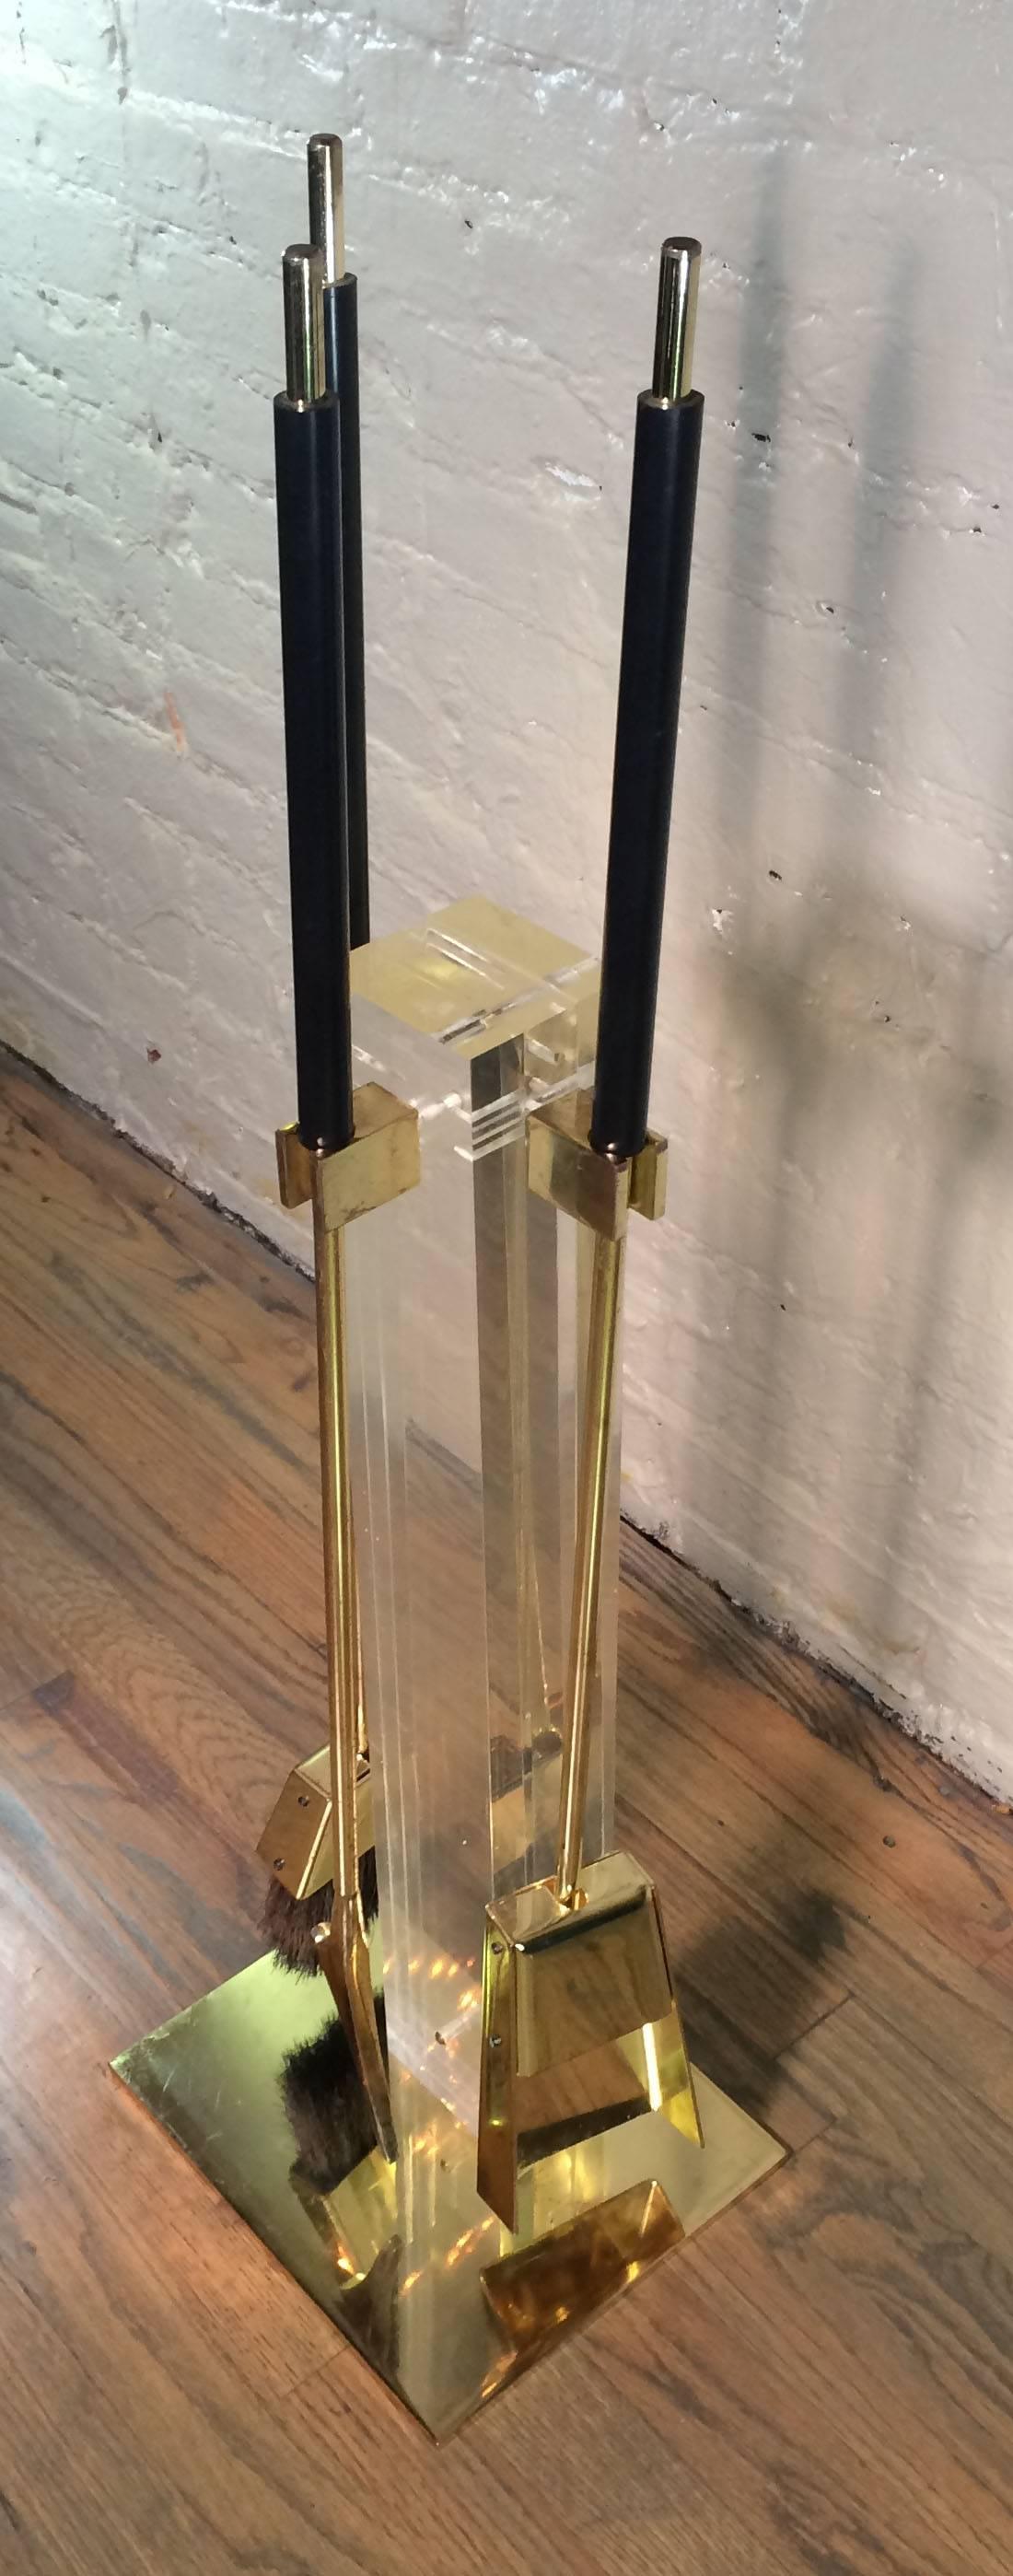 Four-piece set of clear Lucite and brass plated fireplace tools by Alessandro Albrizzi. Clear lucite post with brass plated tools and tool pegs. Handles are black acrylic. 